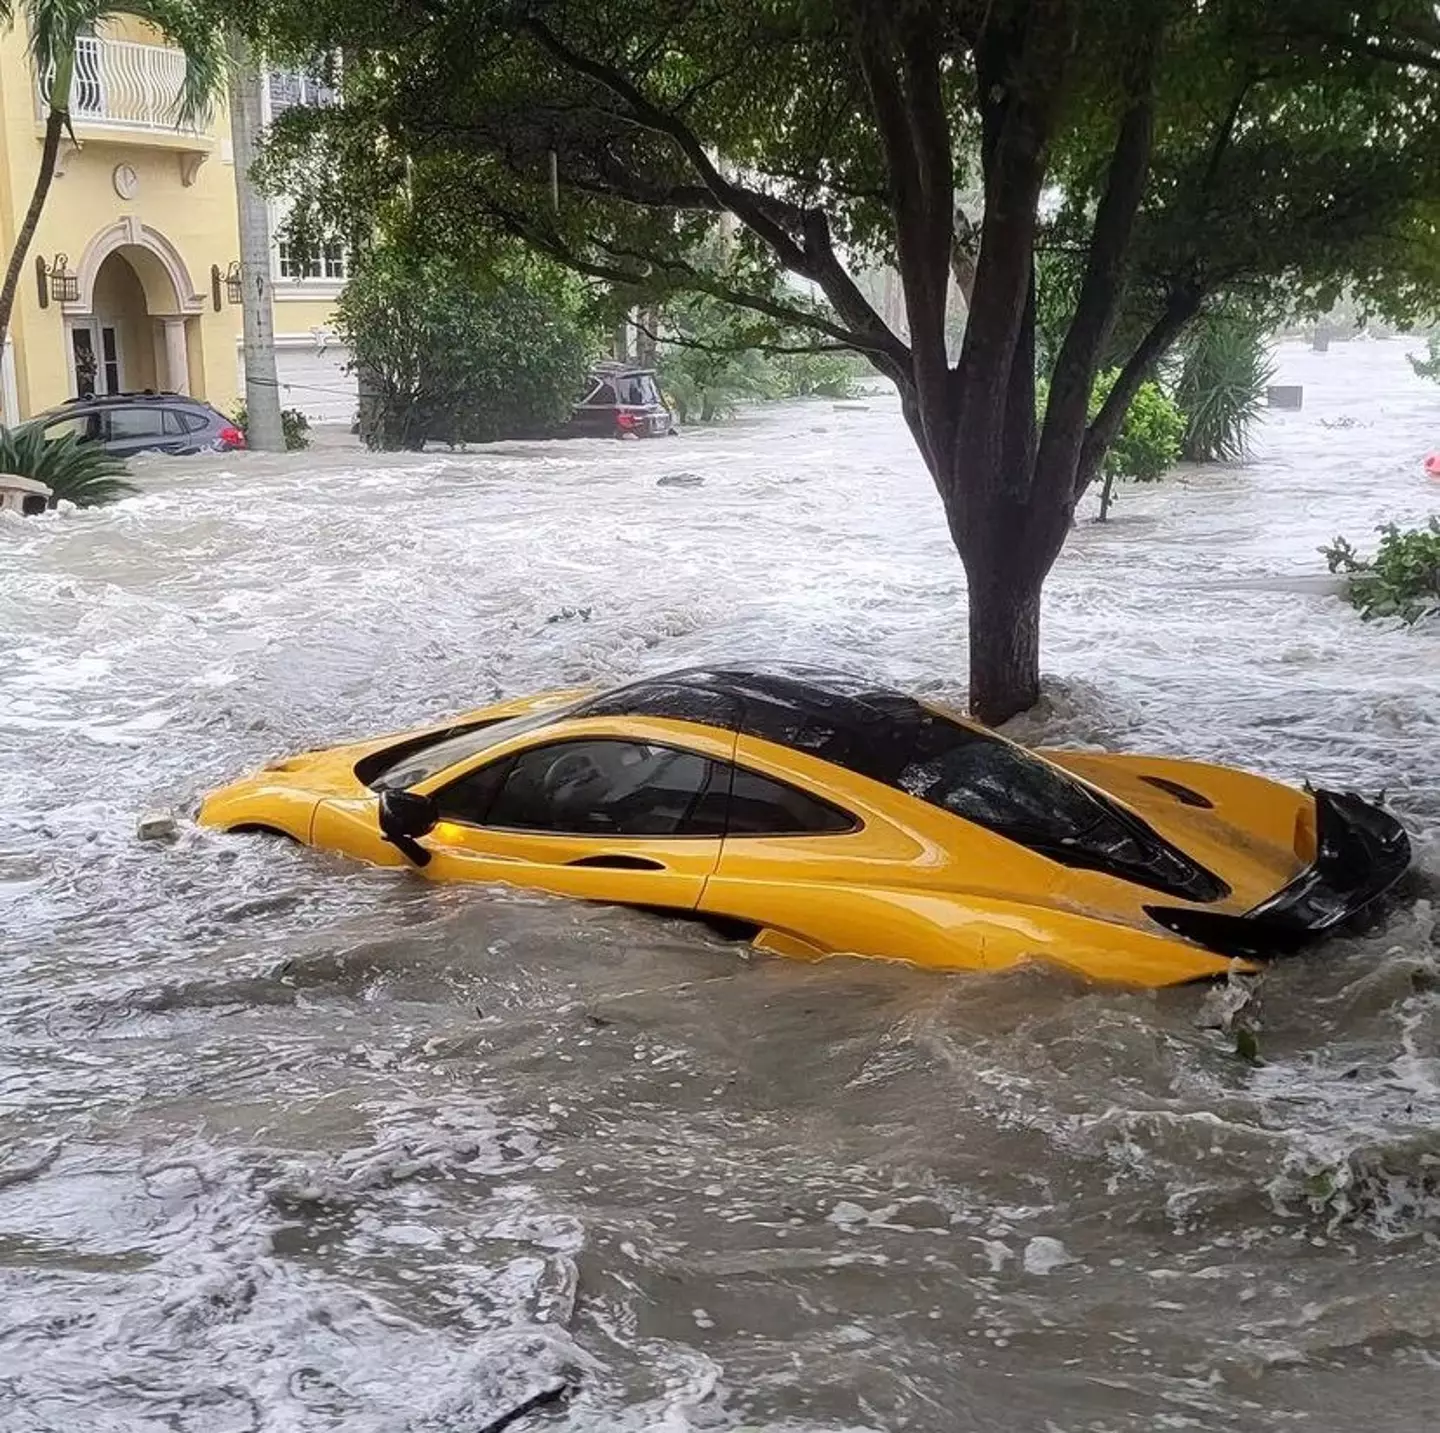 Ernie's supercar was washed away during the hurricane.